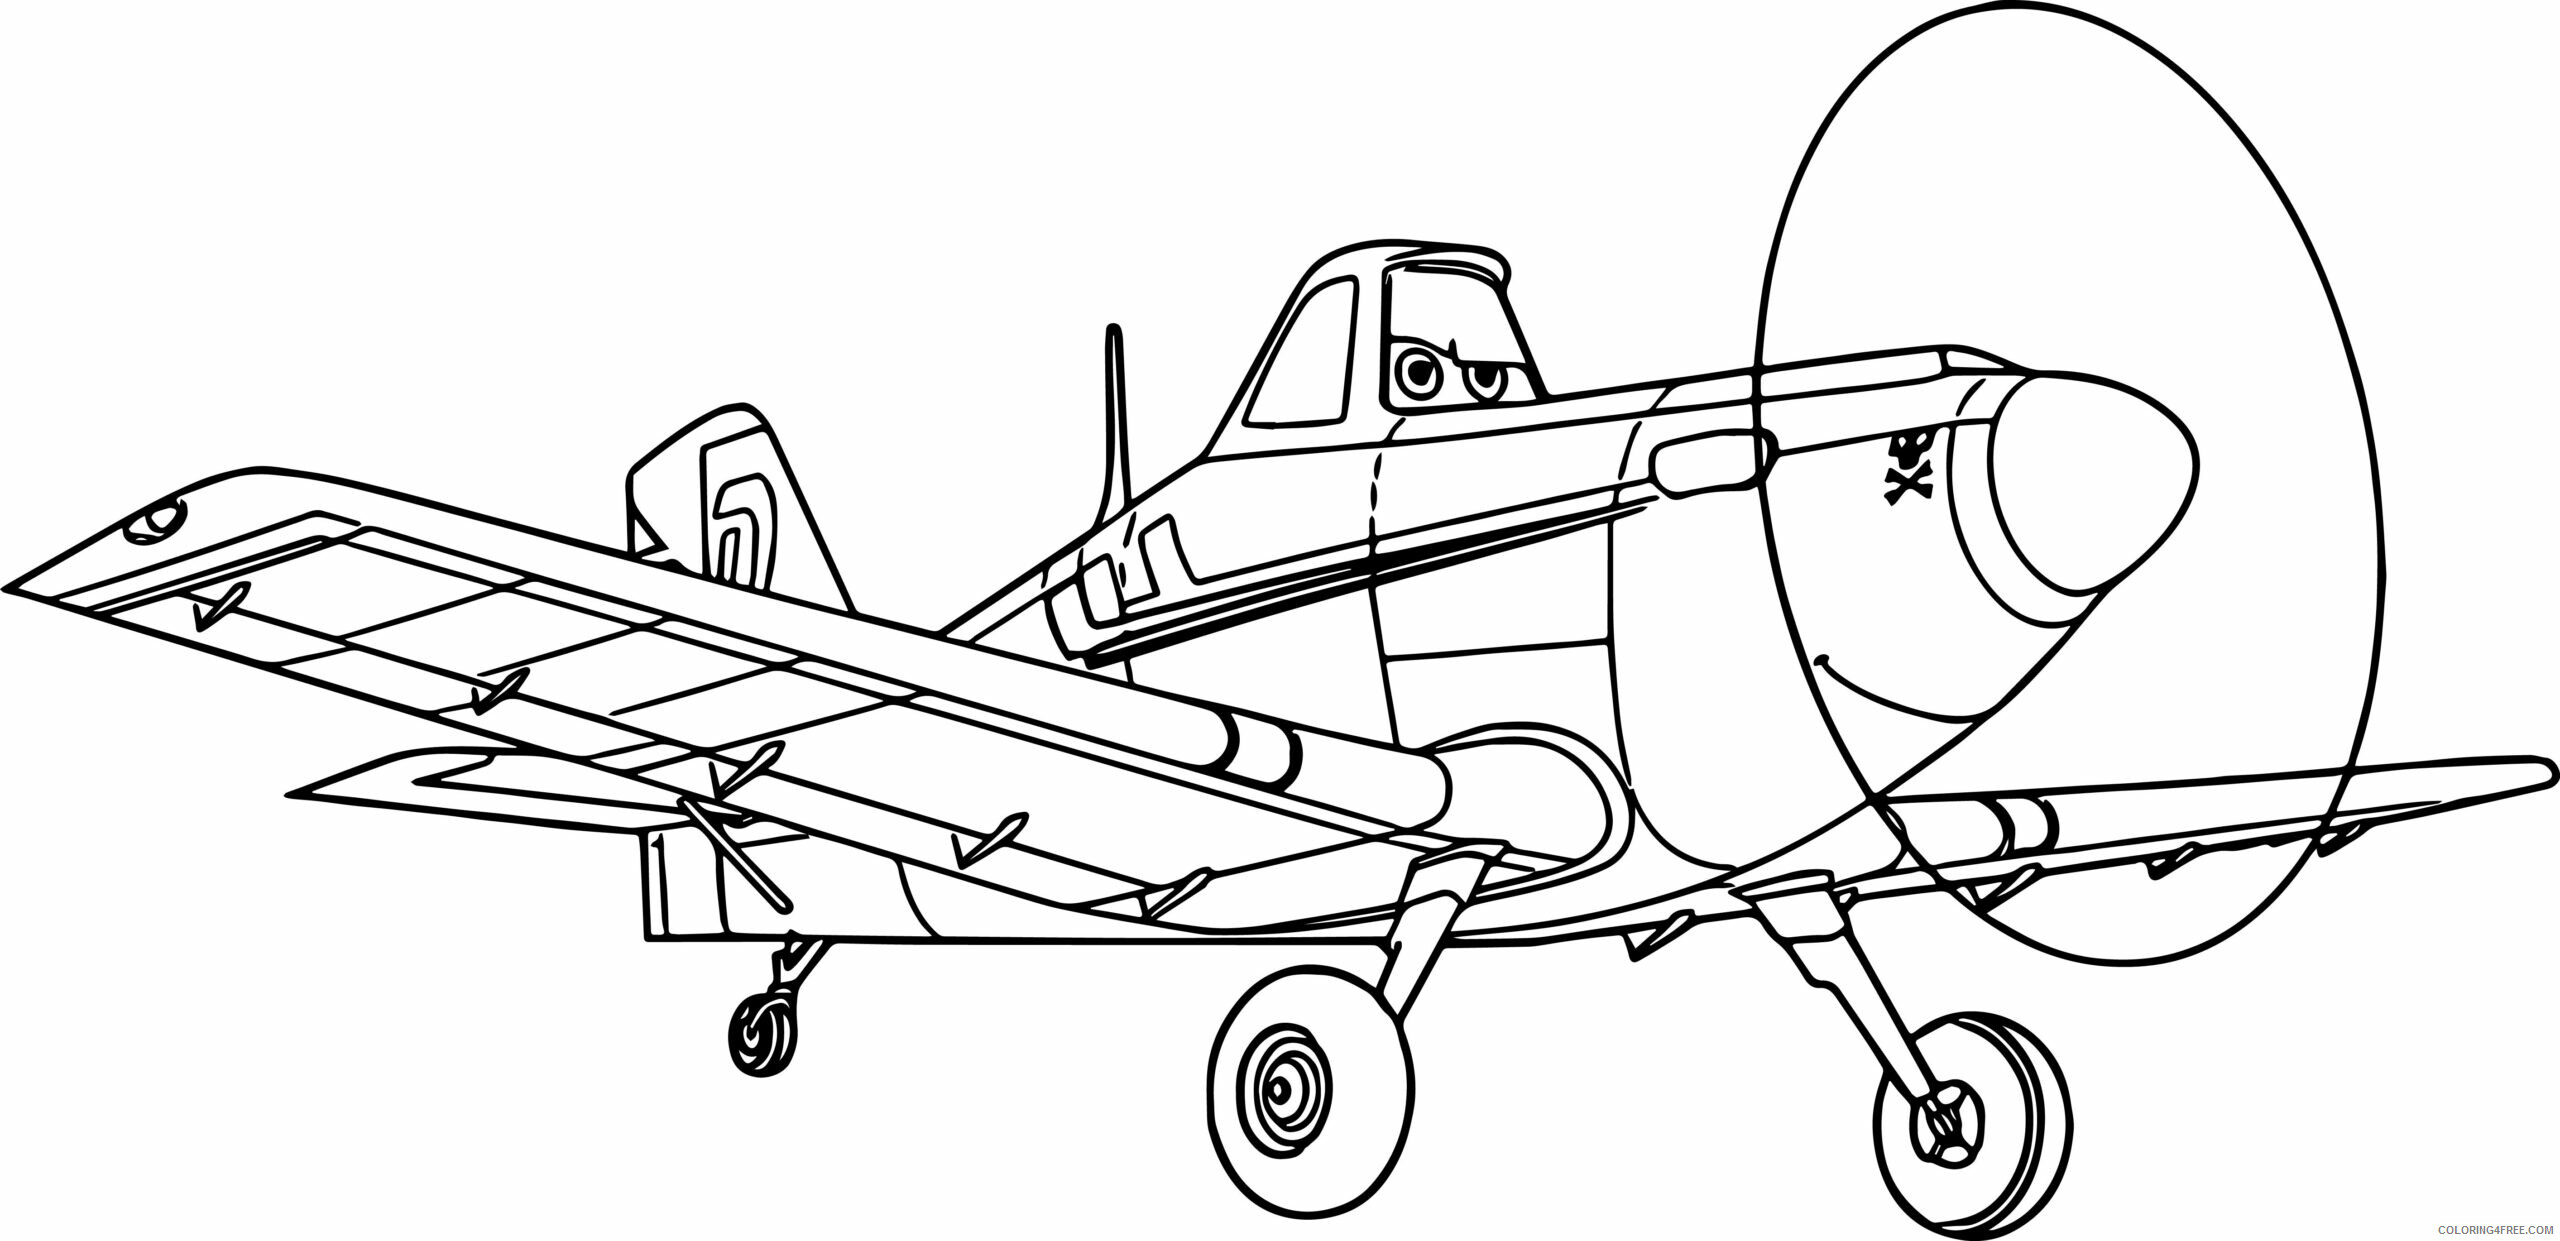 Air Plane Coloring Pages Printable Sheets Ww2 Airplane at 2021 a 2928 Coloring4free